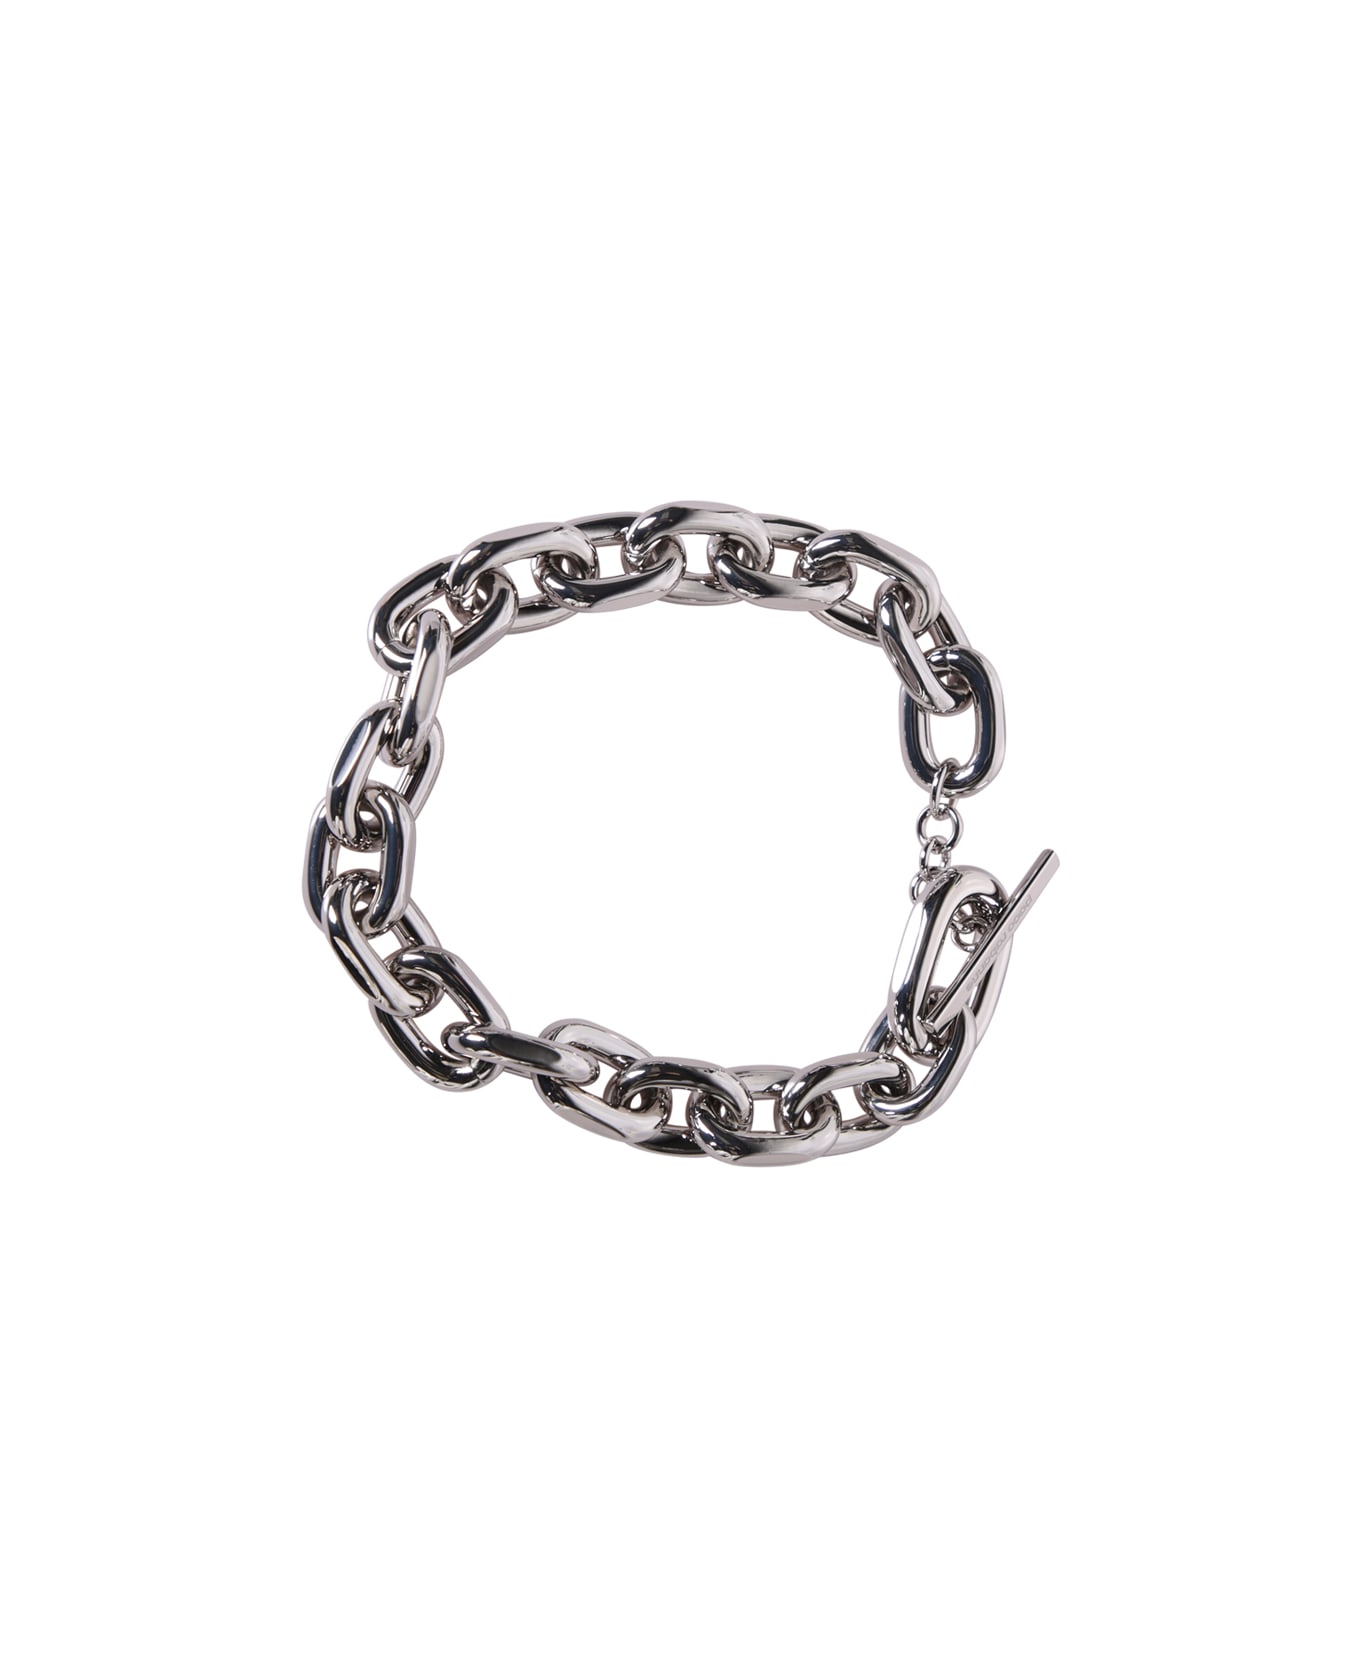 Paco Rabanne Xl Link Silver Nacklace - Metallic